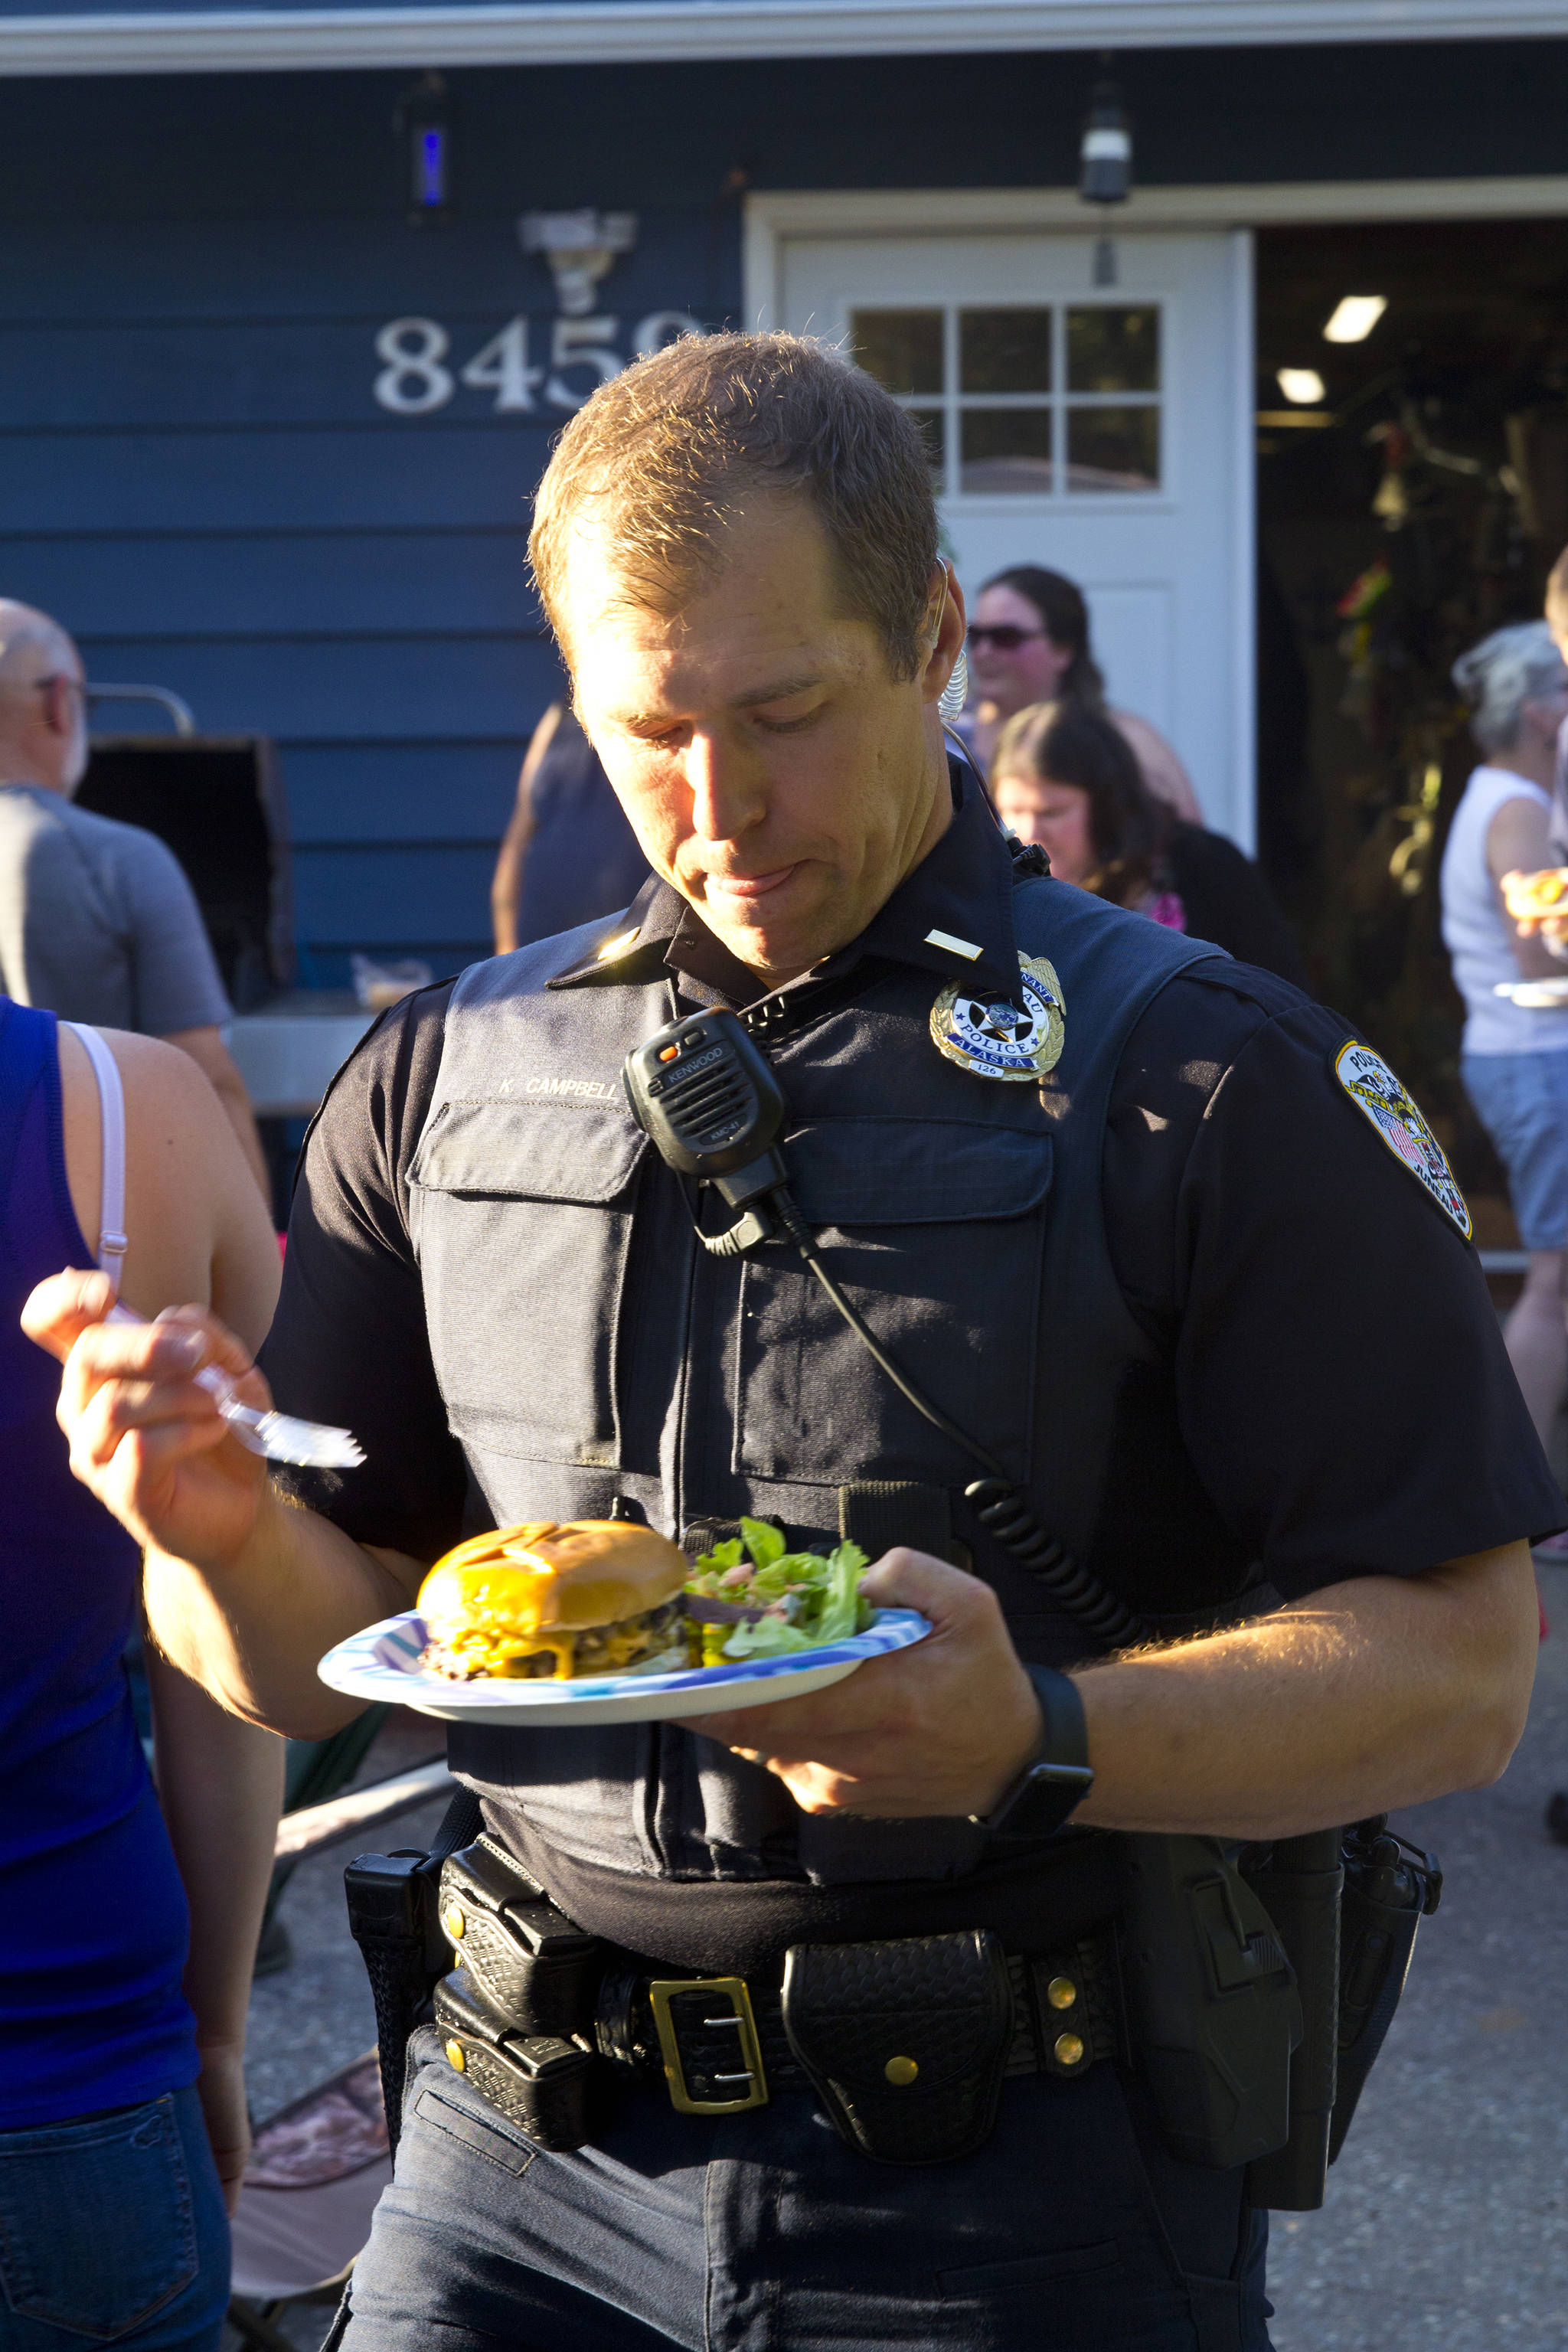 Lt. Krag Campbell, patrol lieutenant with the Juneau Police Department, enjoys a bite to eat at a party during the National Night Out, Aug. 6, 2019. (Michael S. Lockett | Juneau Empire)